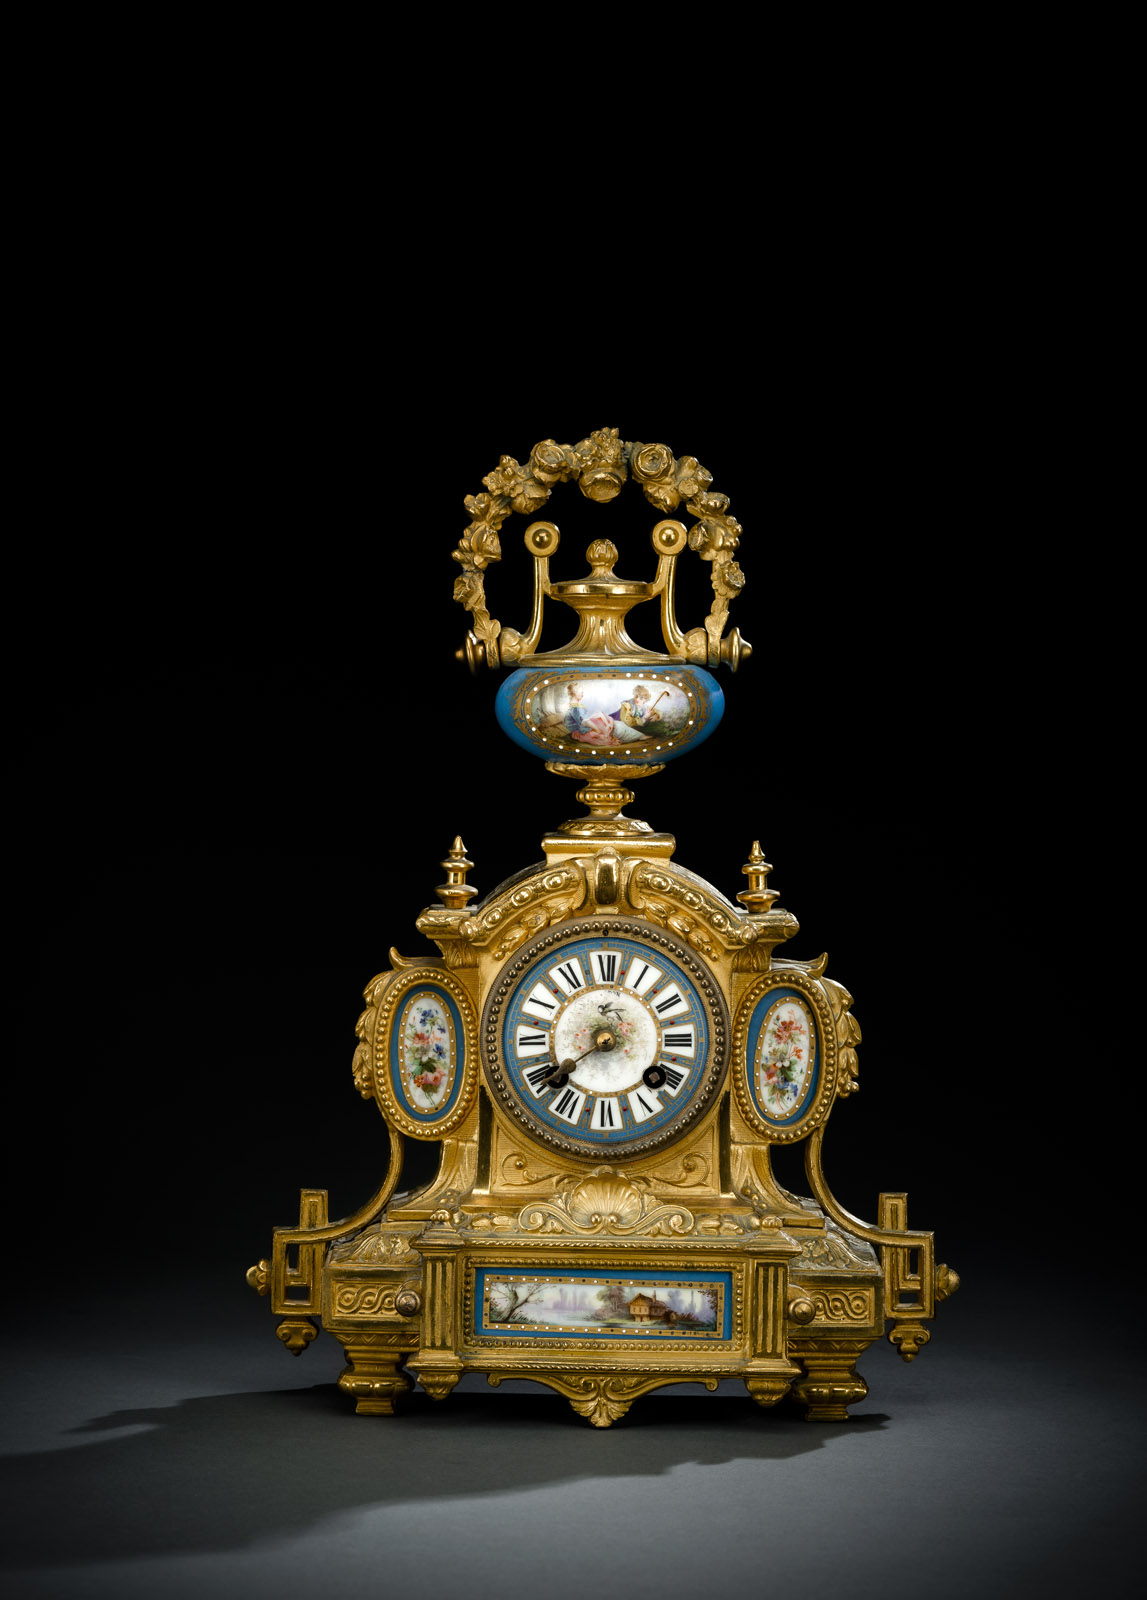 Gilded bronze case with movable handle on top and porcelain plaques in Sèvres style. Blue fond, polychrome painted and gilded porcelain. Porcelain dial with Roman numerals, one hand is missing. Parisian movement with 8 day going, half-hour striking on bell, spring suspension. Pendulum missing. Stamped on the reverse: P.H. MOUREY 77. Black lacquer underneath, rest. Running not checked.